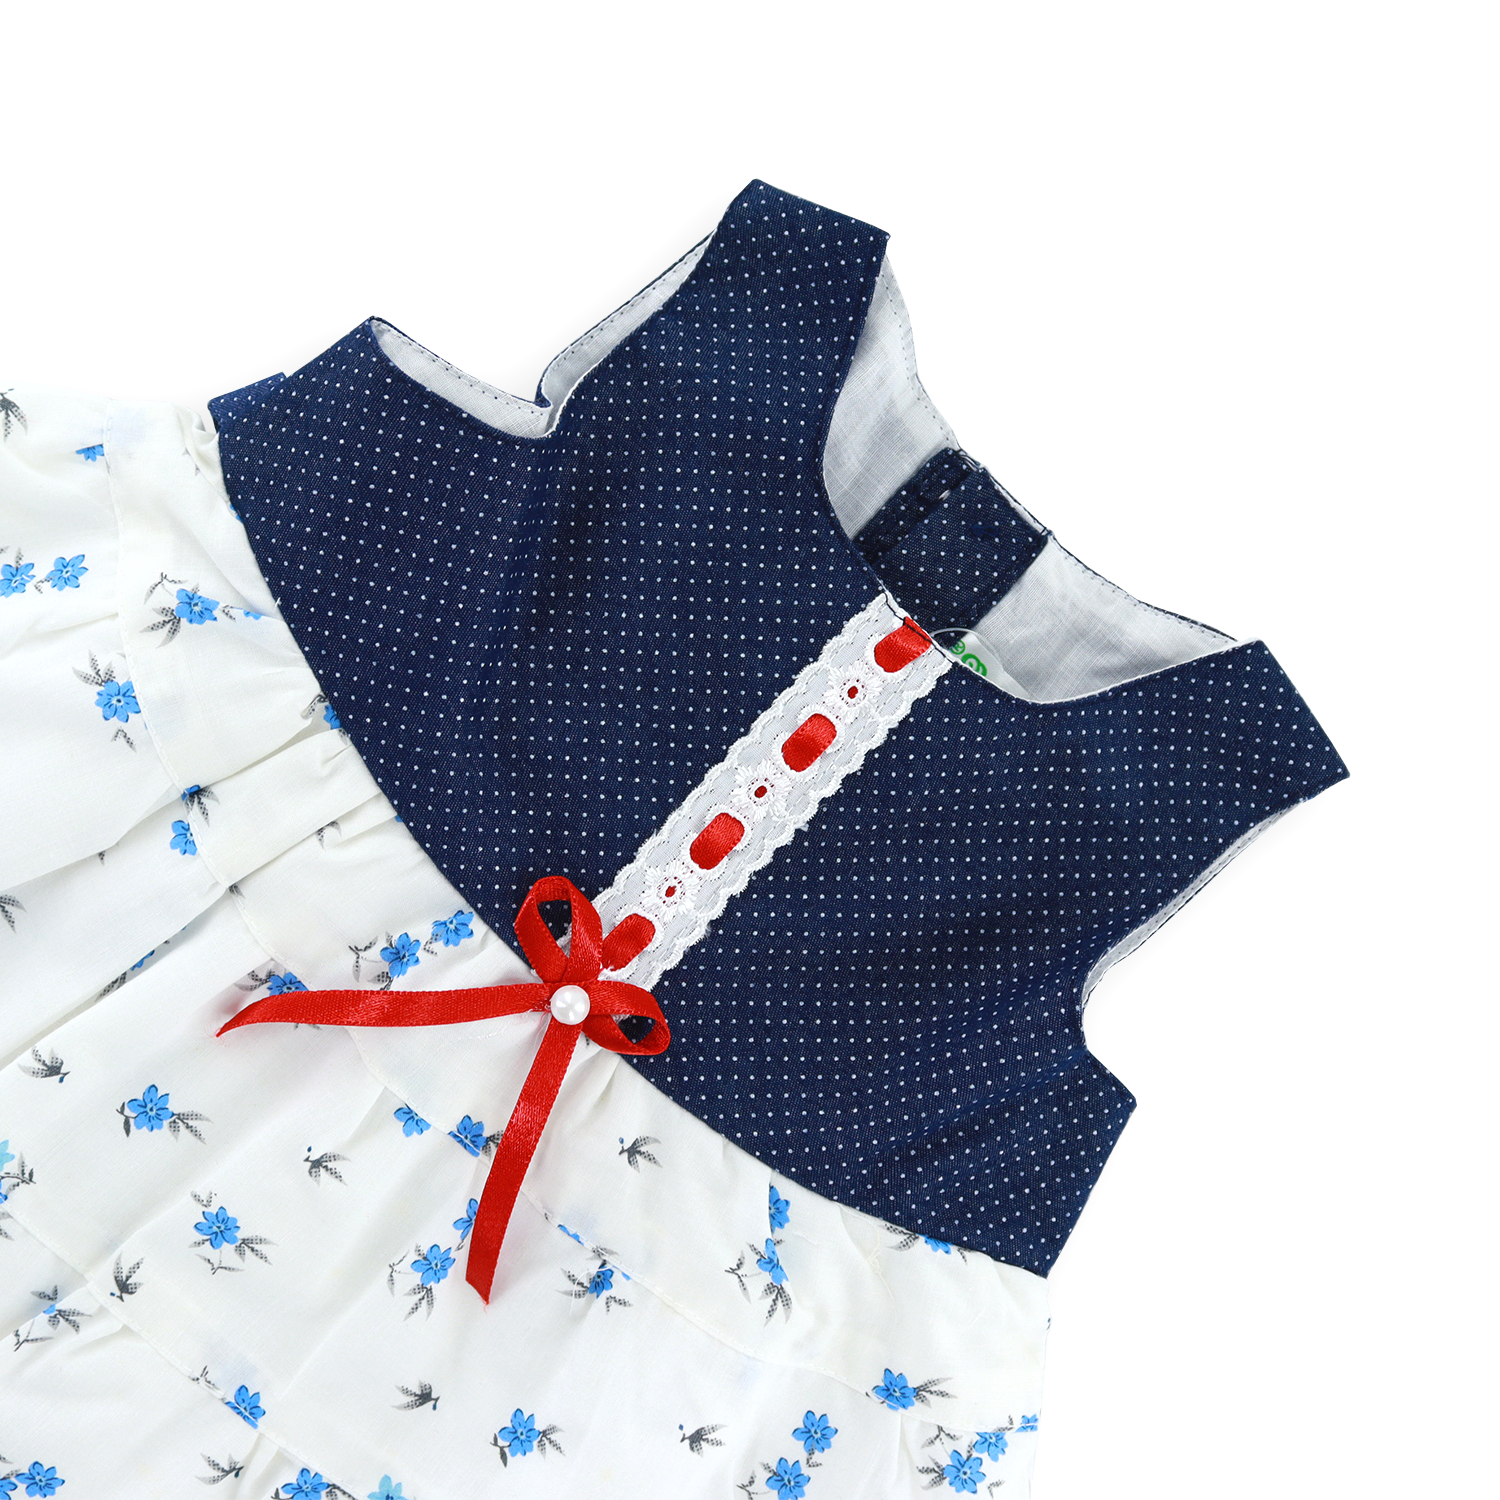 Printed Frock for Baby Girls